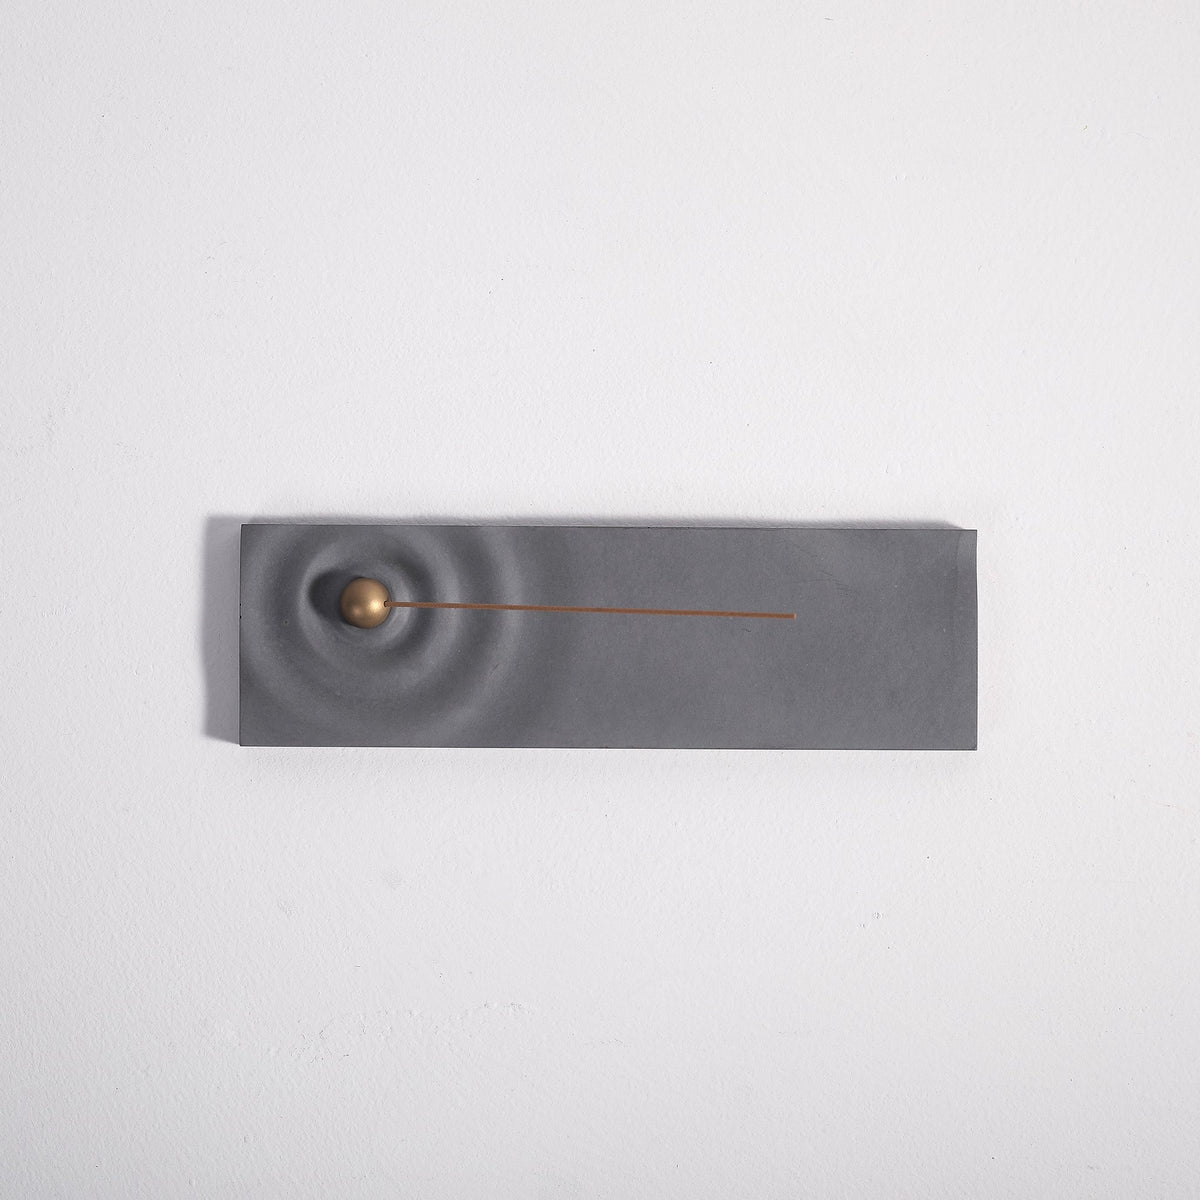 Ripple incense burner in gray by Kin Objects top view